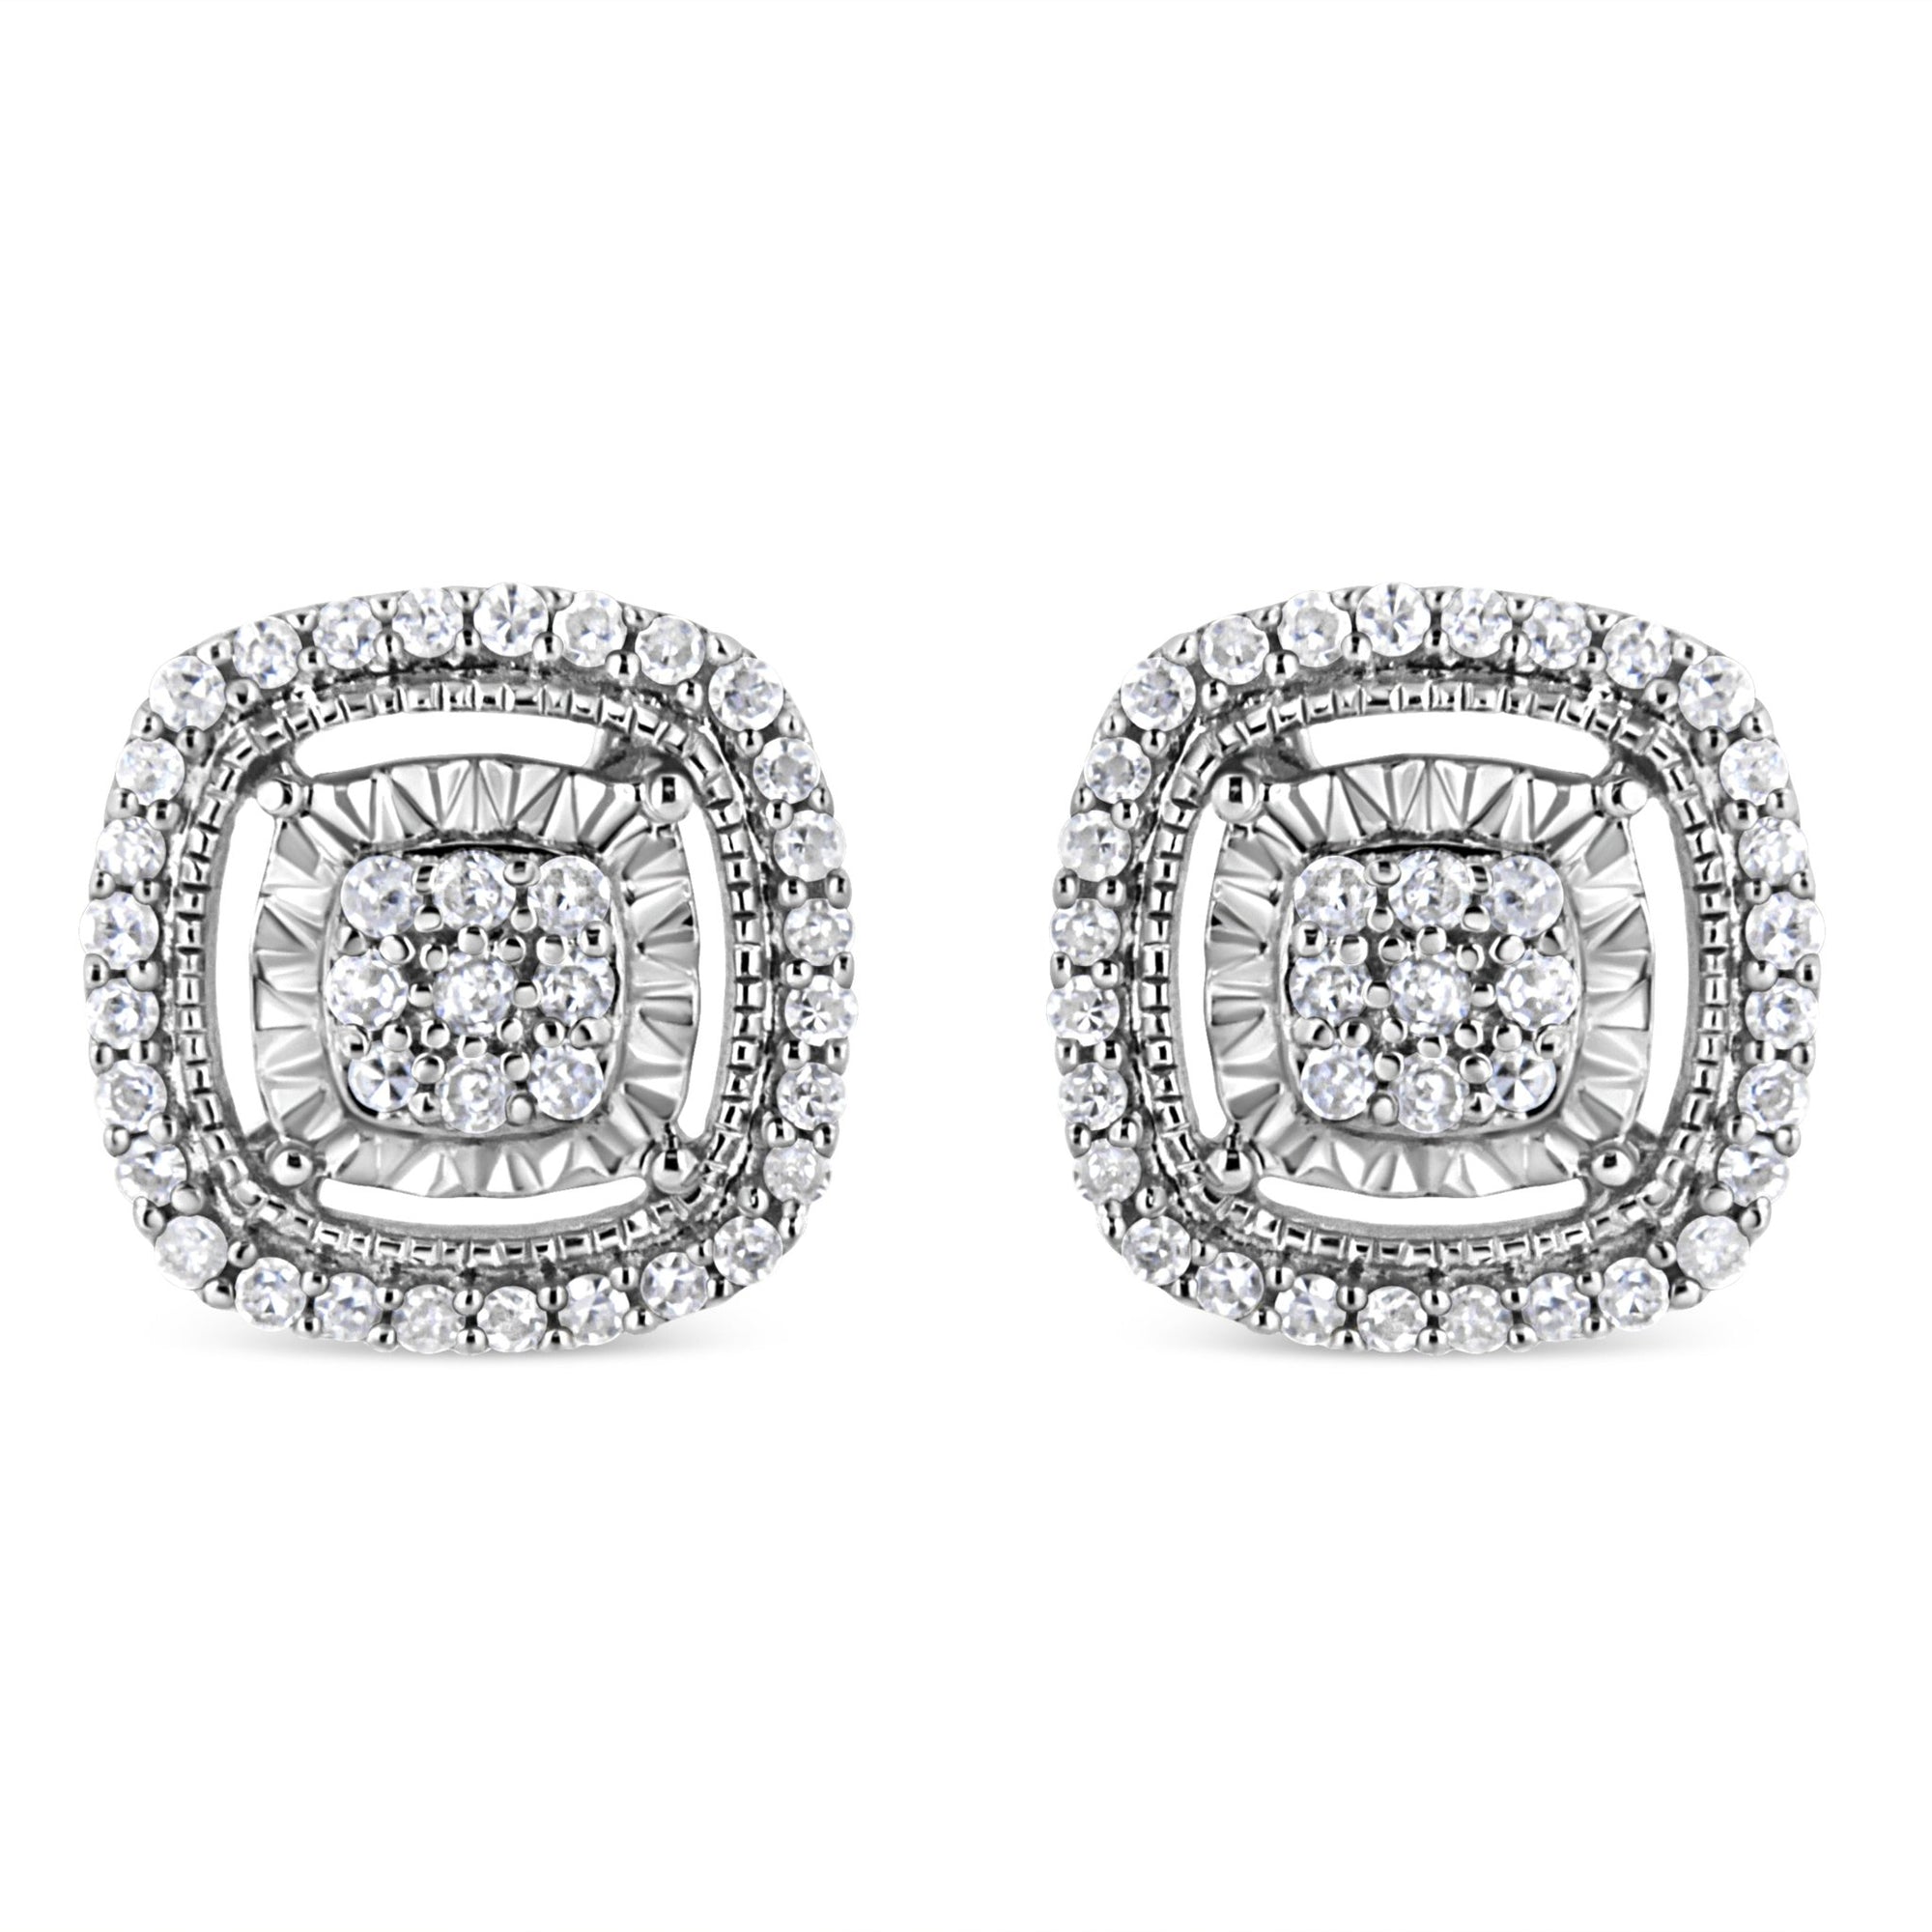 .925 Sterling Silver 1/4 Cttw Prong Set Round-Cut Diamond Cluster in Square Frame Stud Earring (I-J Color, I2-I3 Clarity) - LinkagejewelrydesignLinkagejewelrydesign